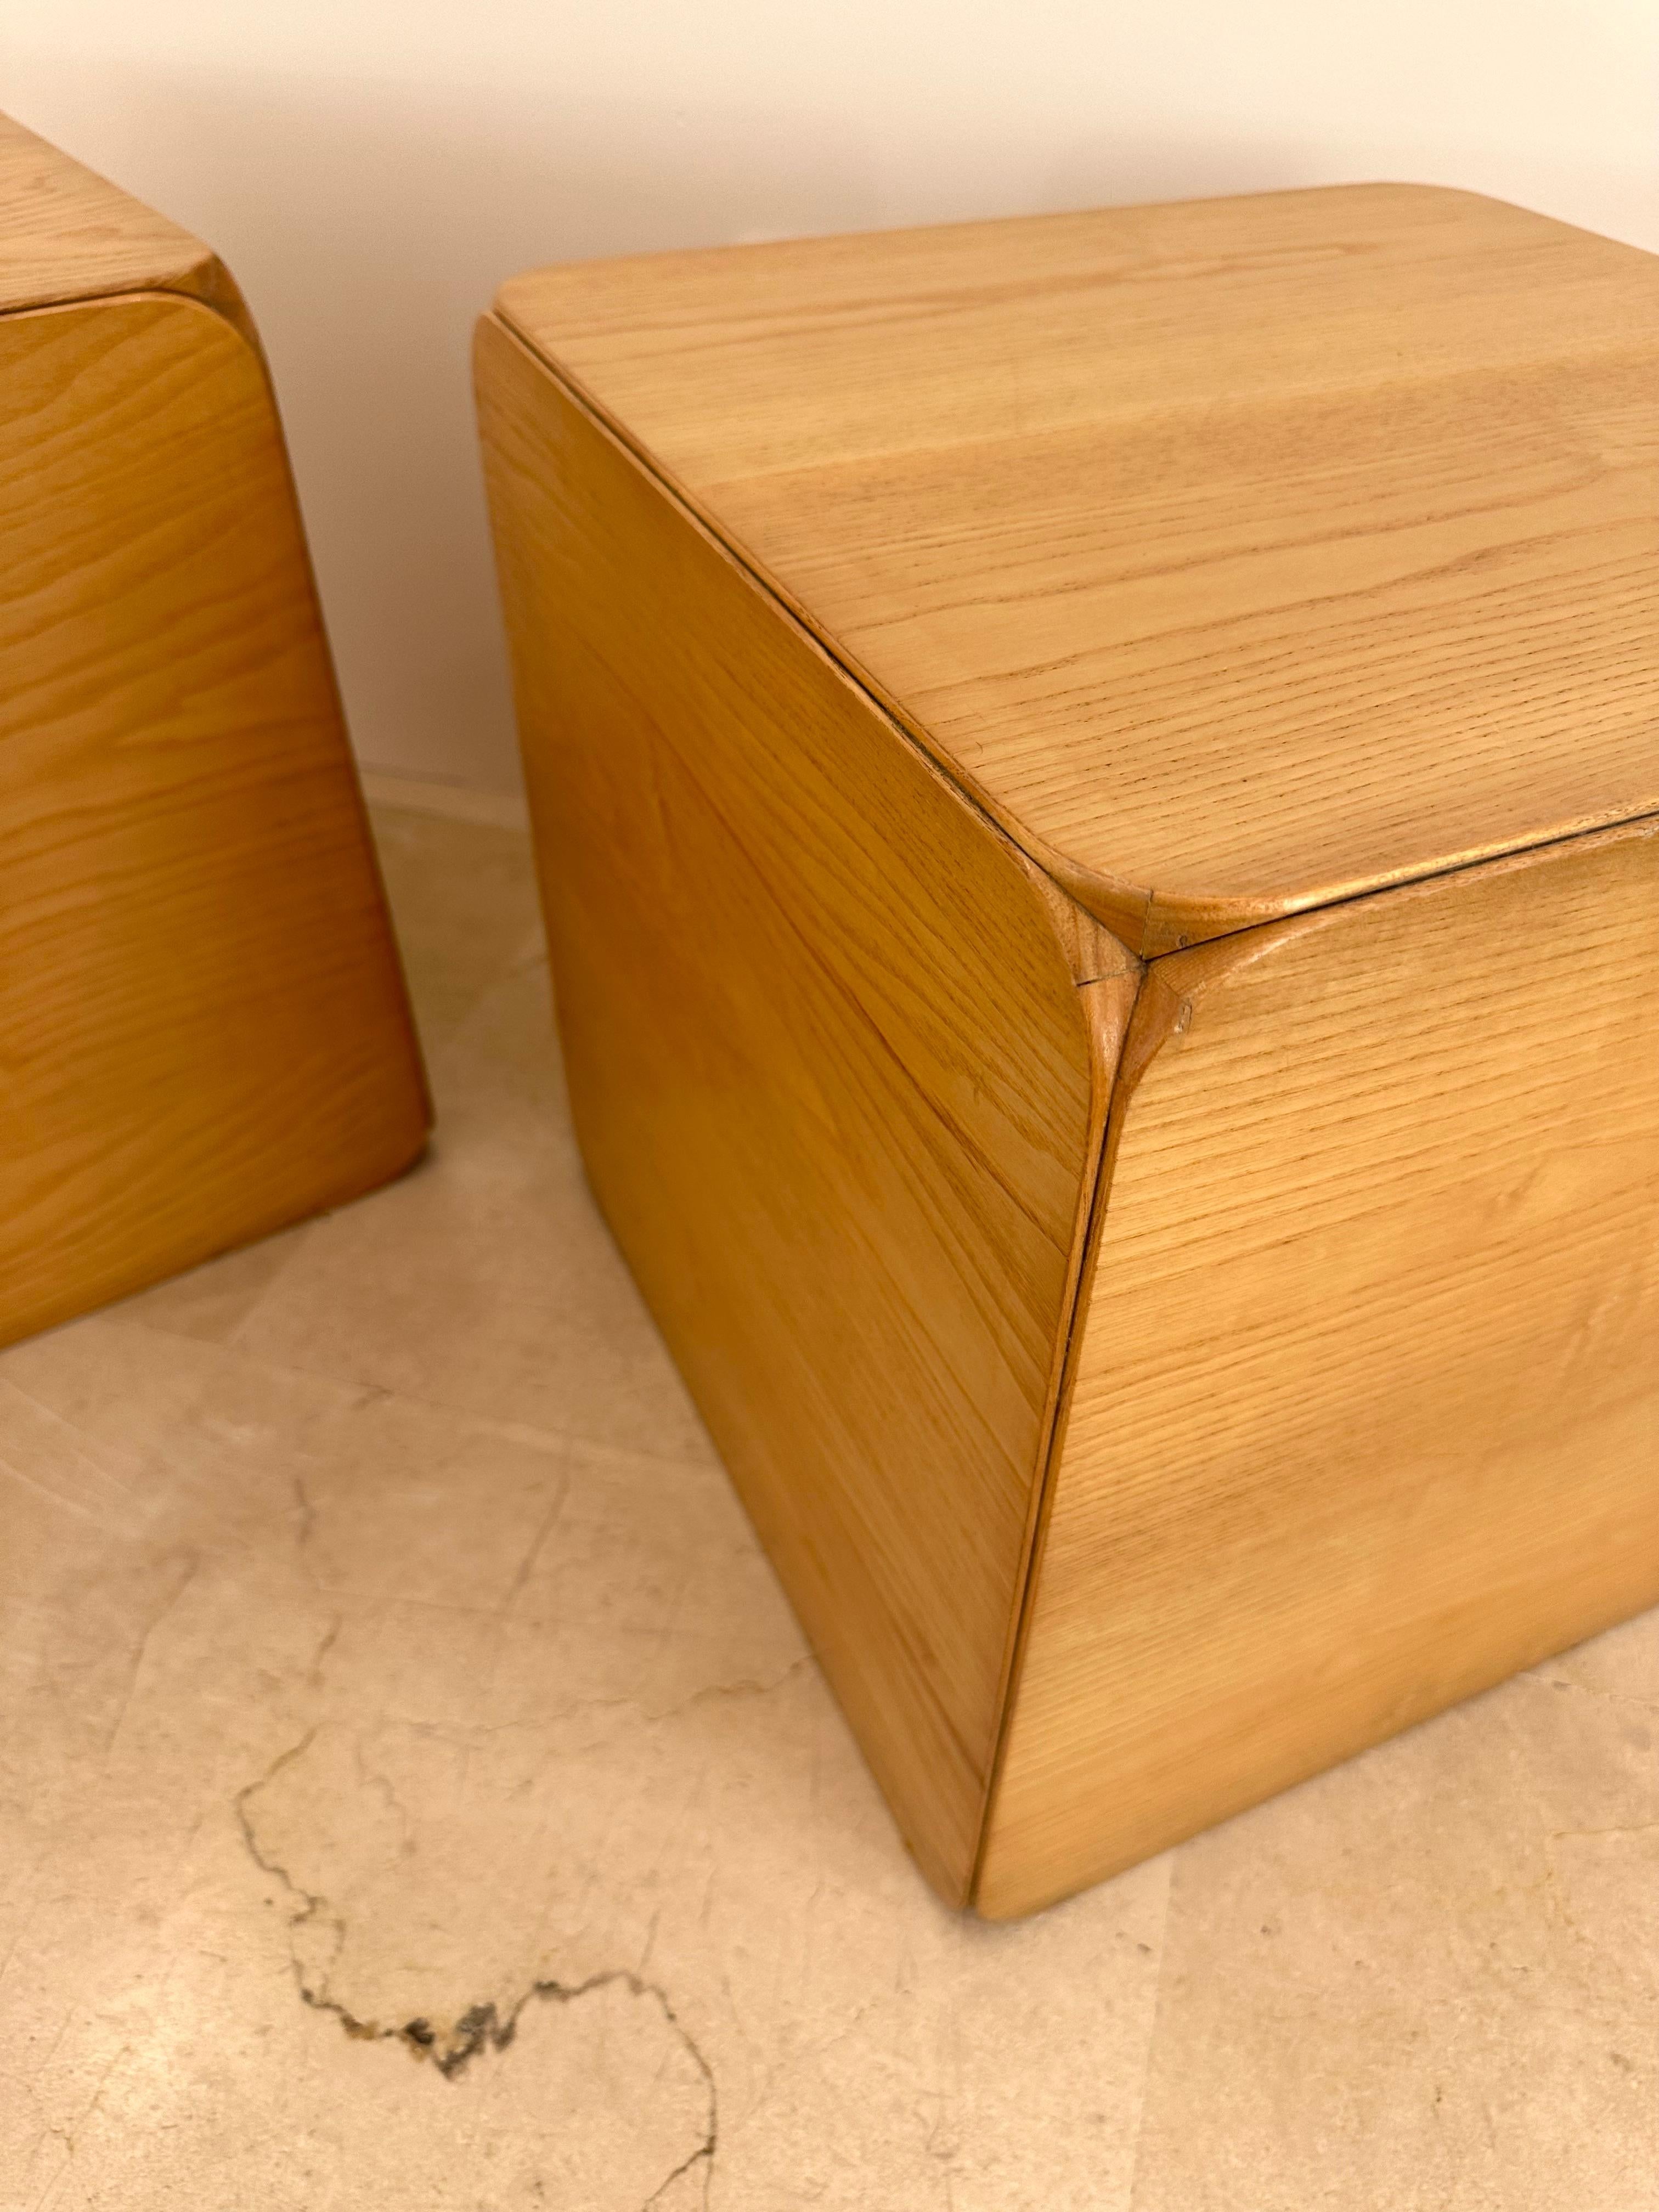 Late 20th Century Wood Cube Stool Samara by Derk Jan de Vries for Maisa di Seveso. Italy, 1970s For Sale